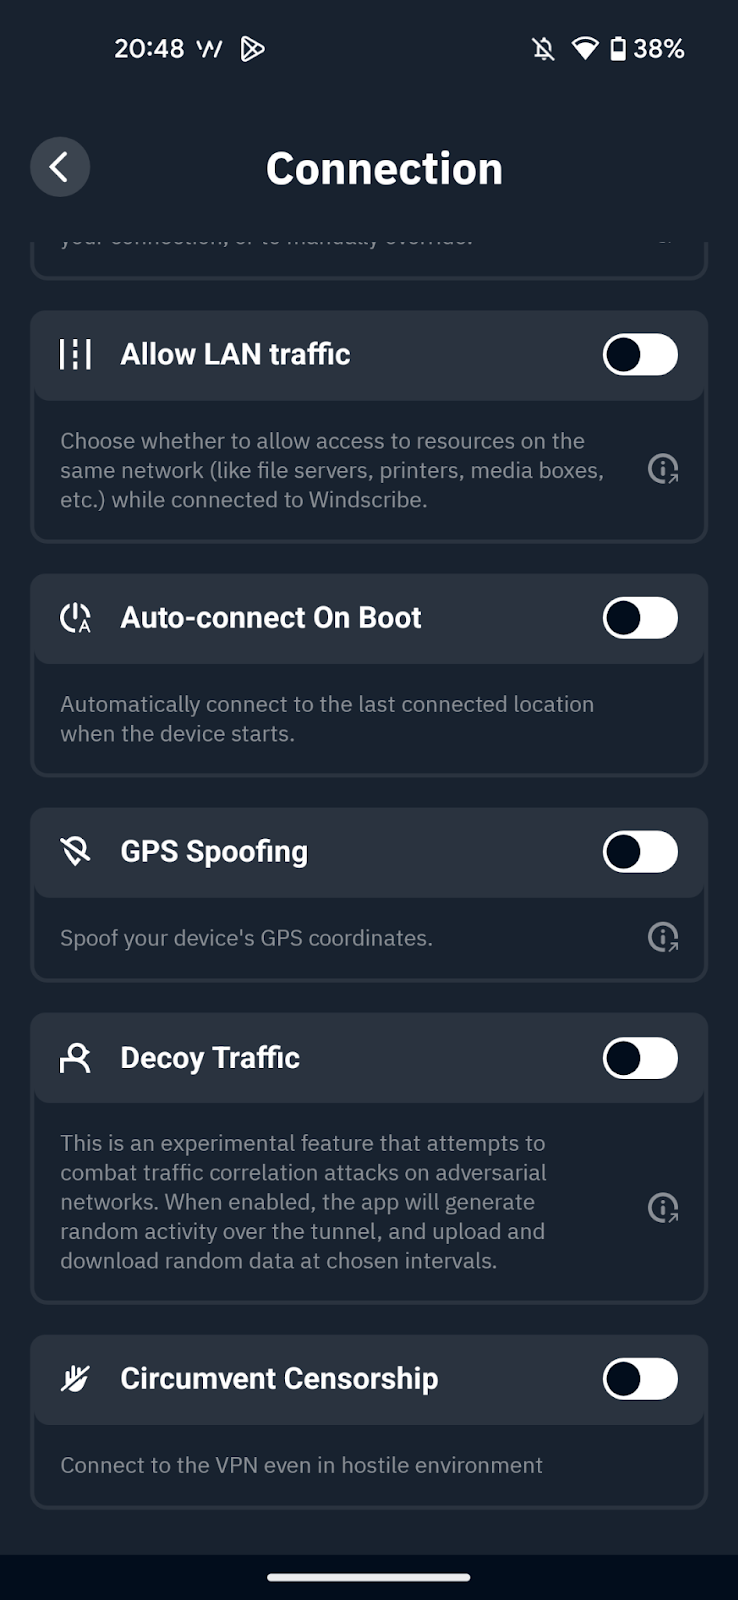 A screenshot of Windscribe's settings, showing its Anti-Censorship features including "Circumvent Censorship"